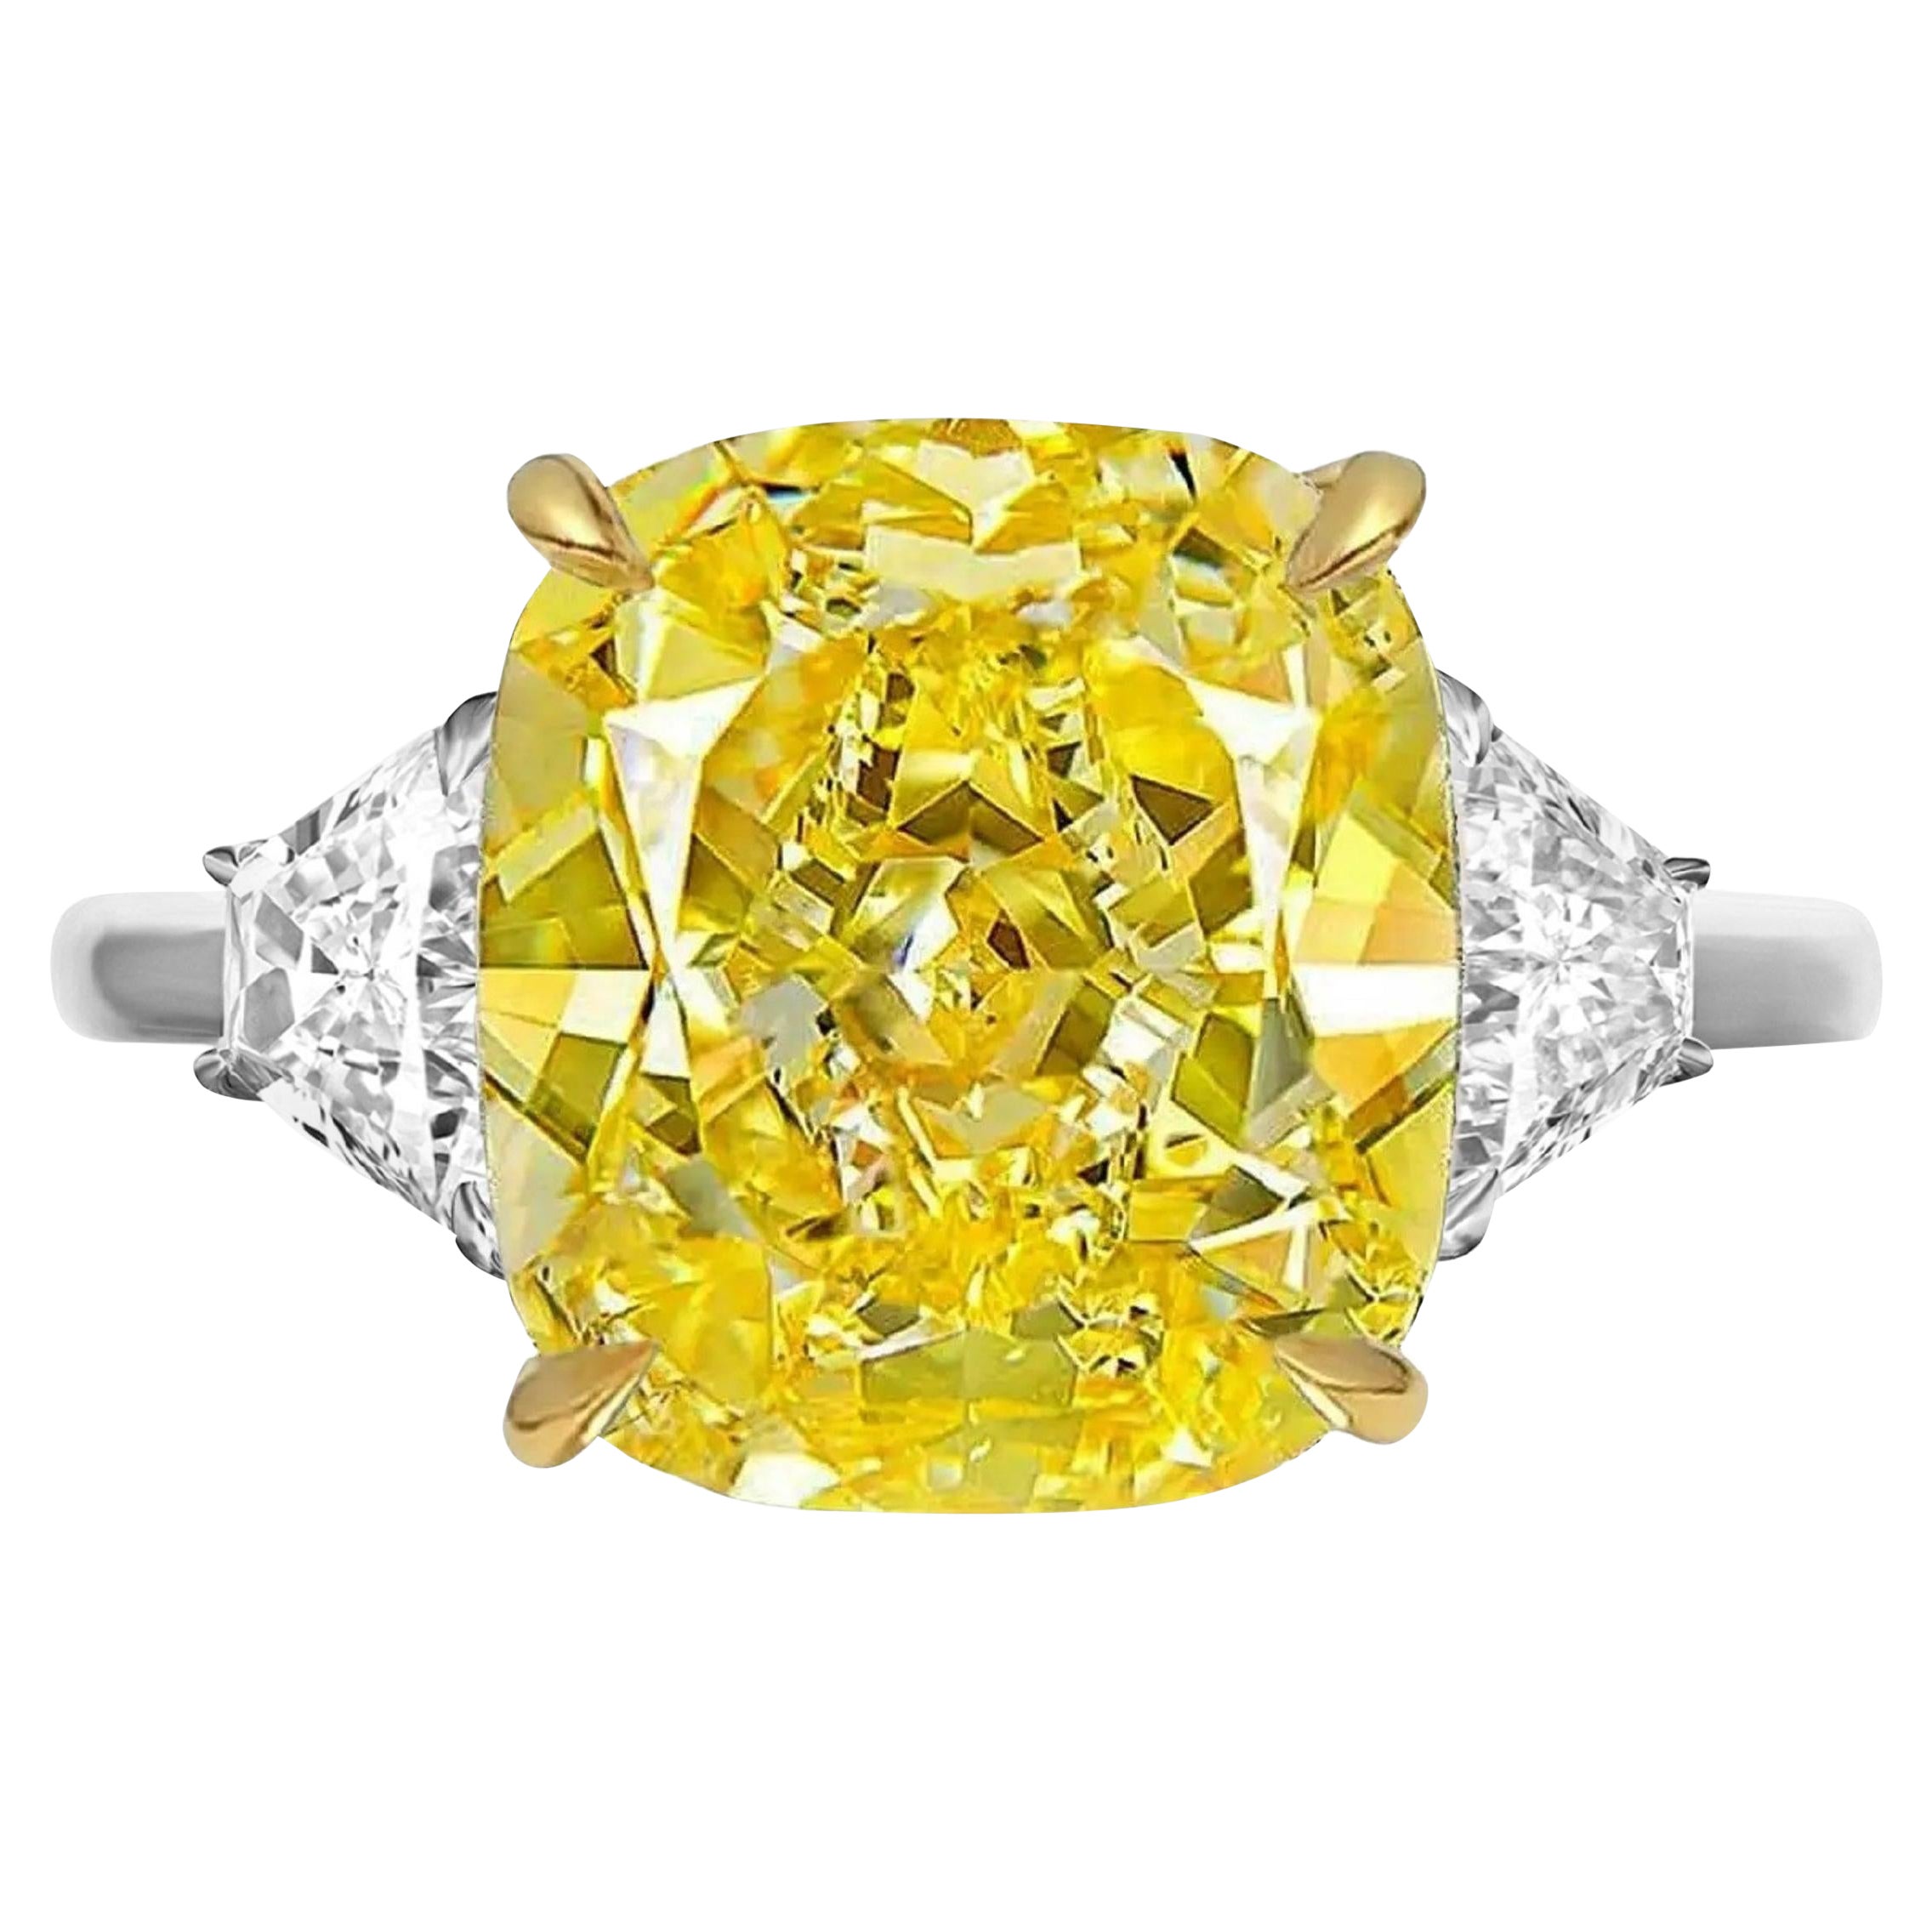 GIA Certified Flawless Clarity 4.30 Carat Fancy Yellow Diamond Ring For Sale